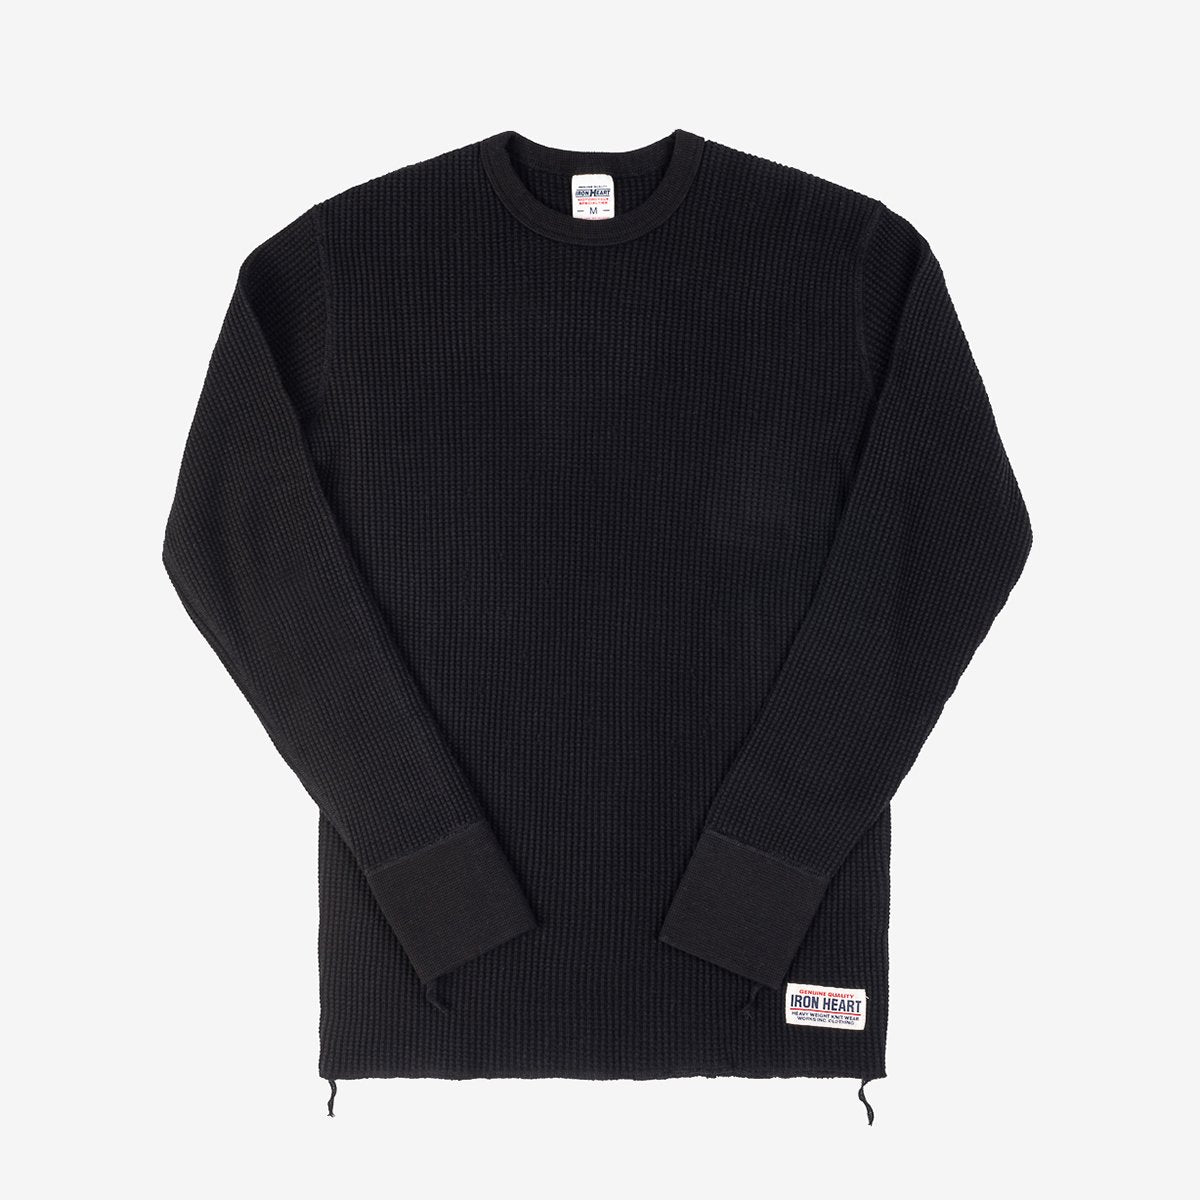 Iron Heart IHTL-1301 Waffle Knit Long Sleeved Crew Neck Thermal Top - Black